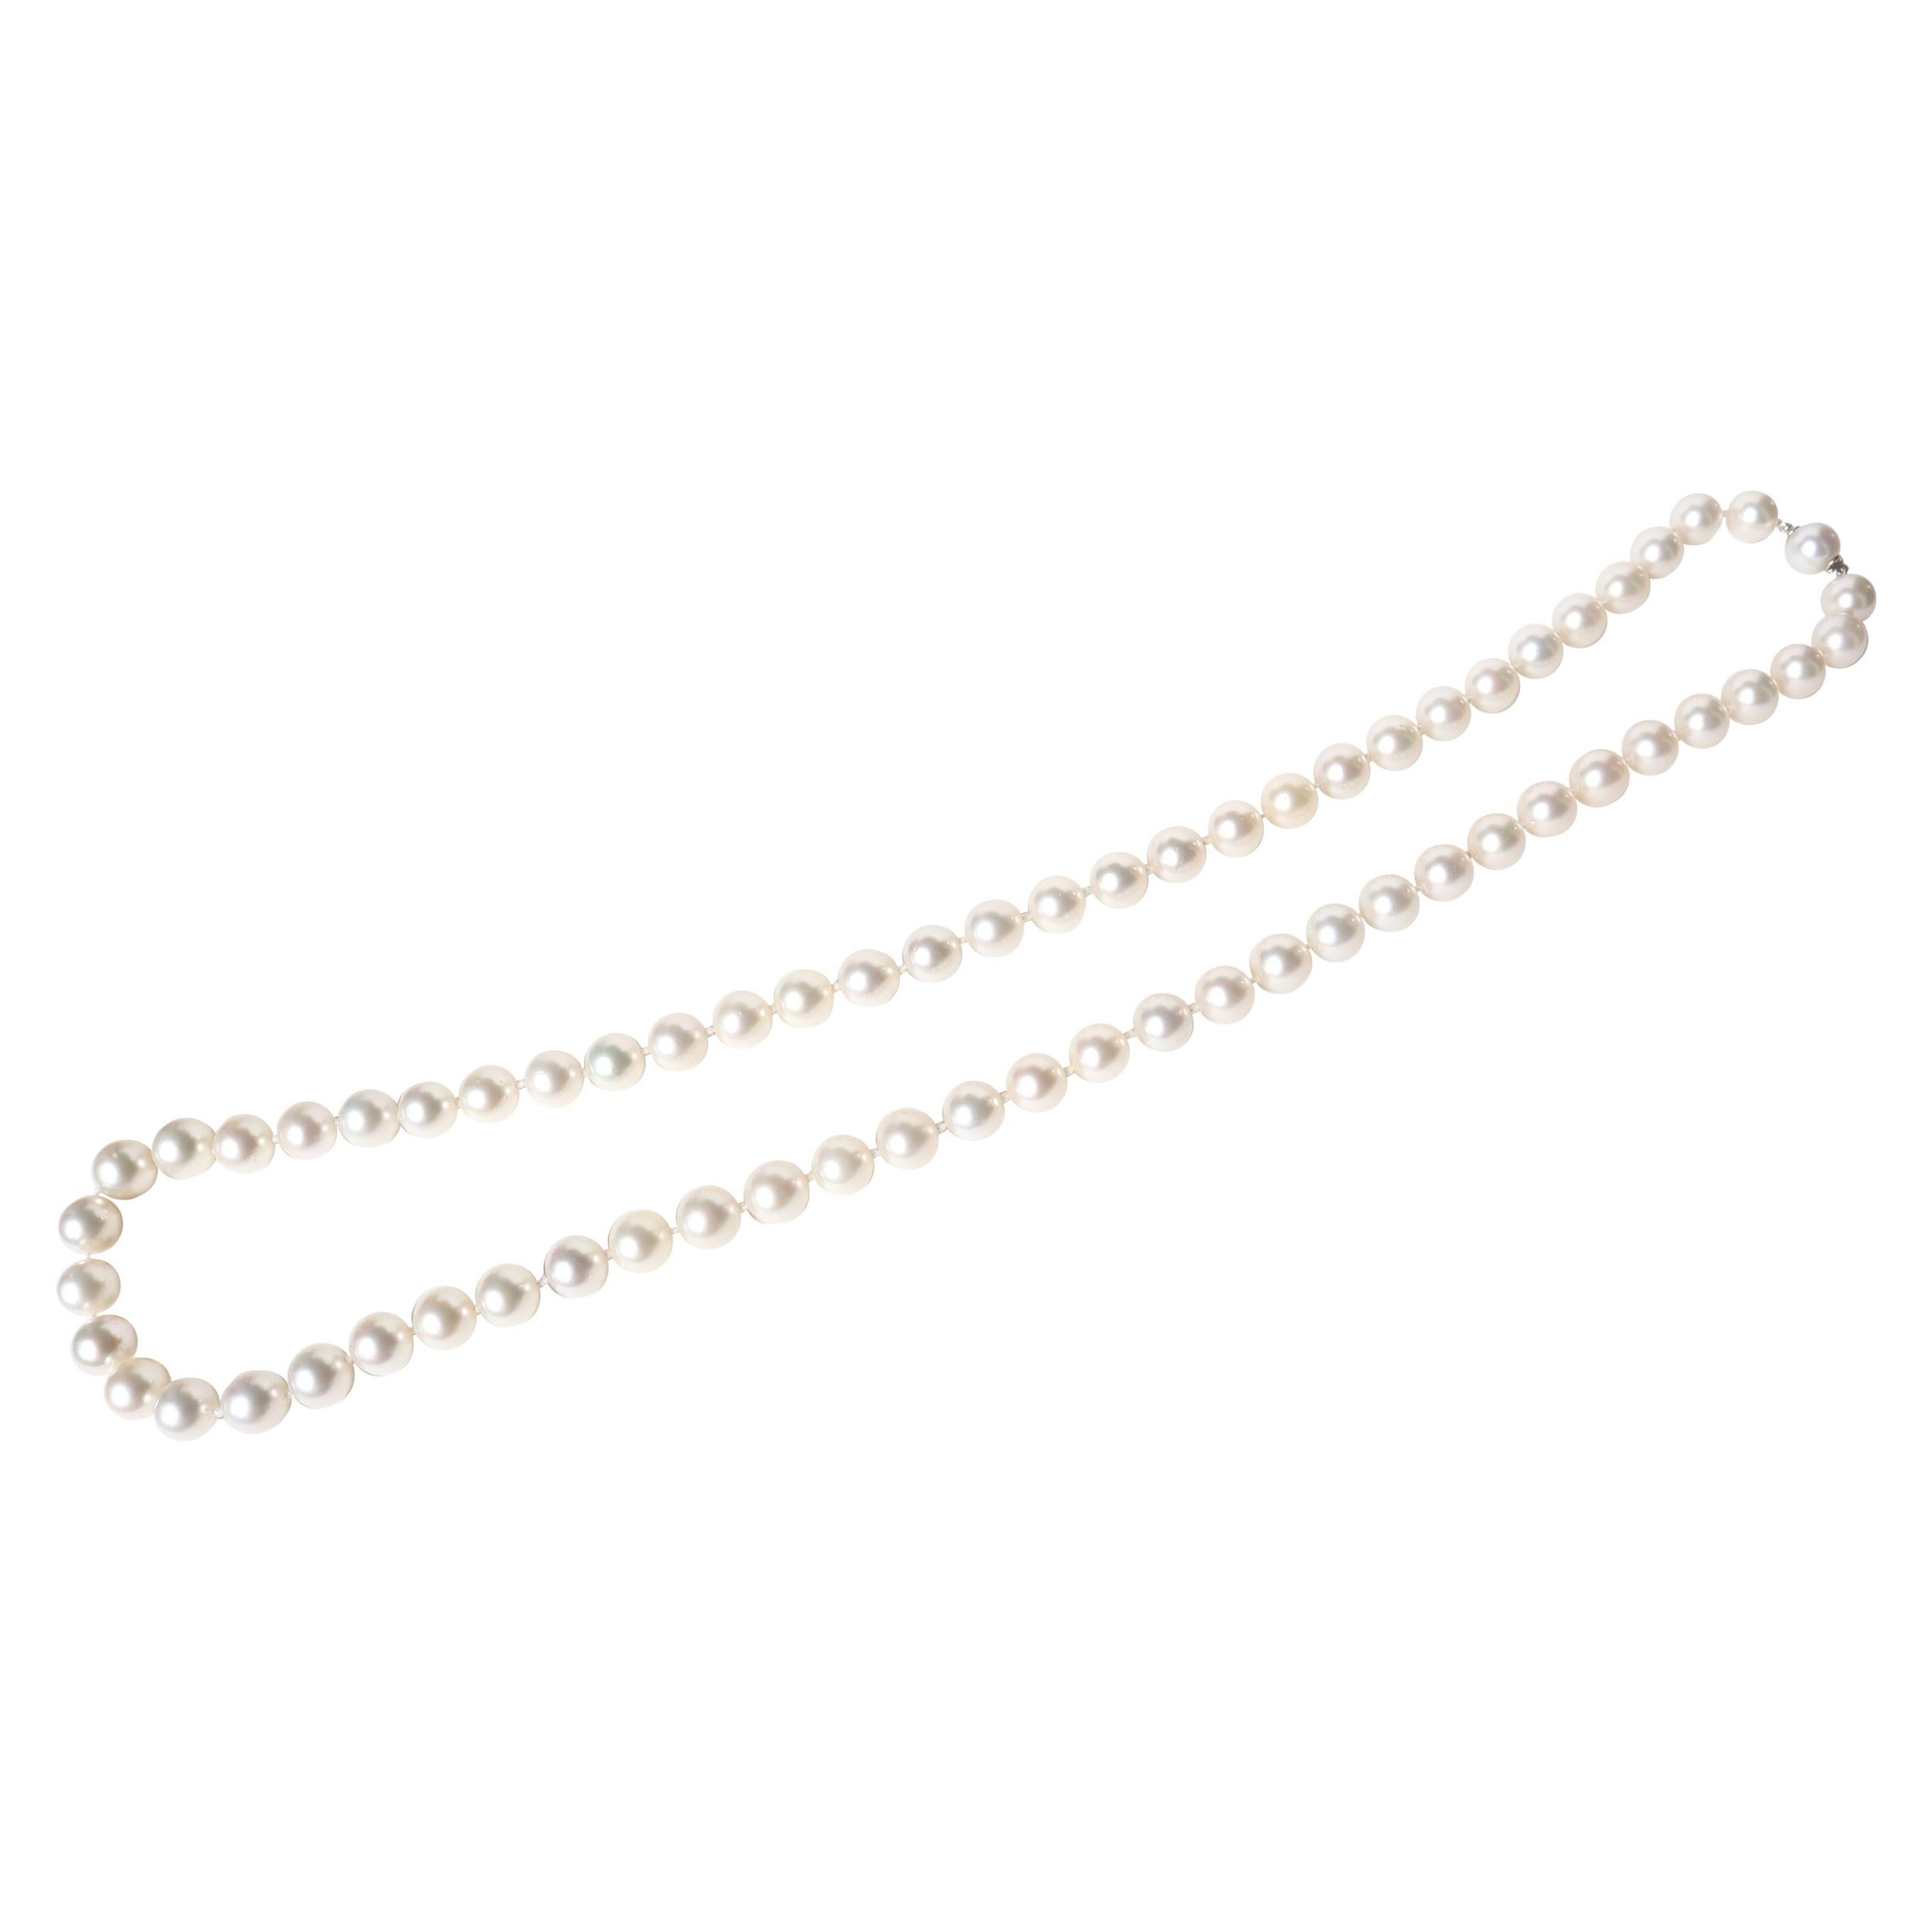 Long Necklace of White Cultured Pearls 12-13mm White Gold Clasp